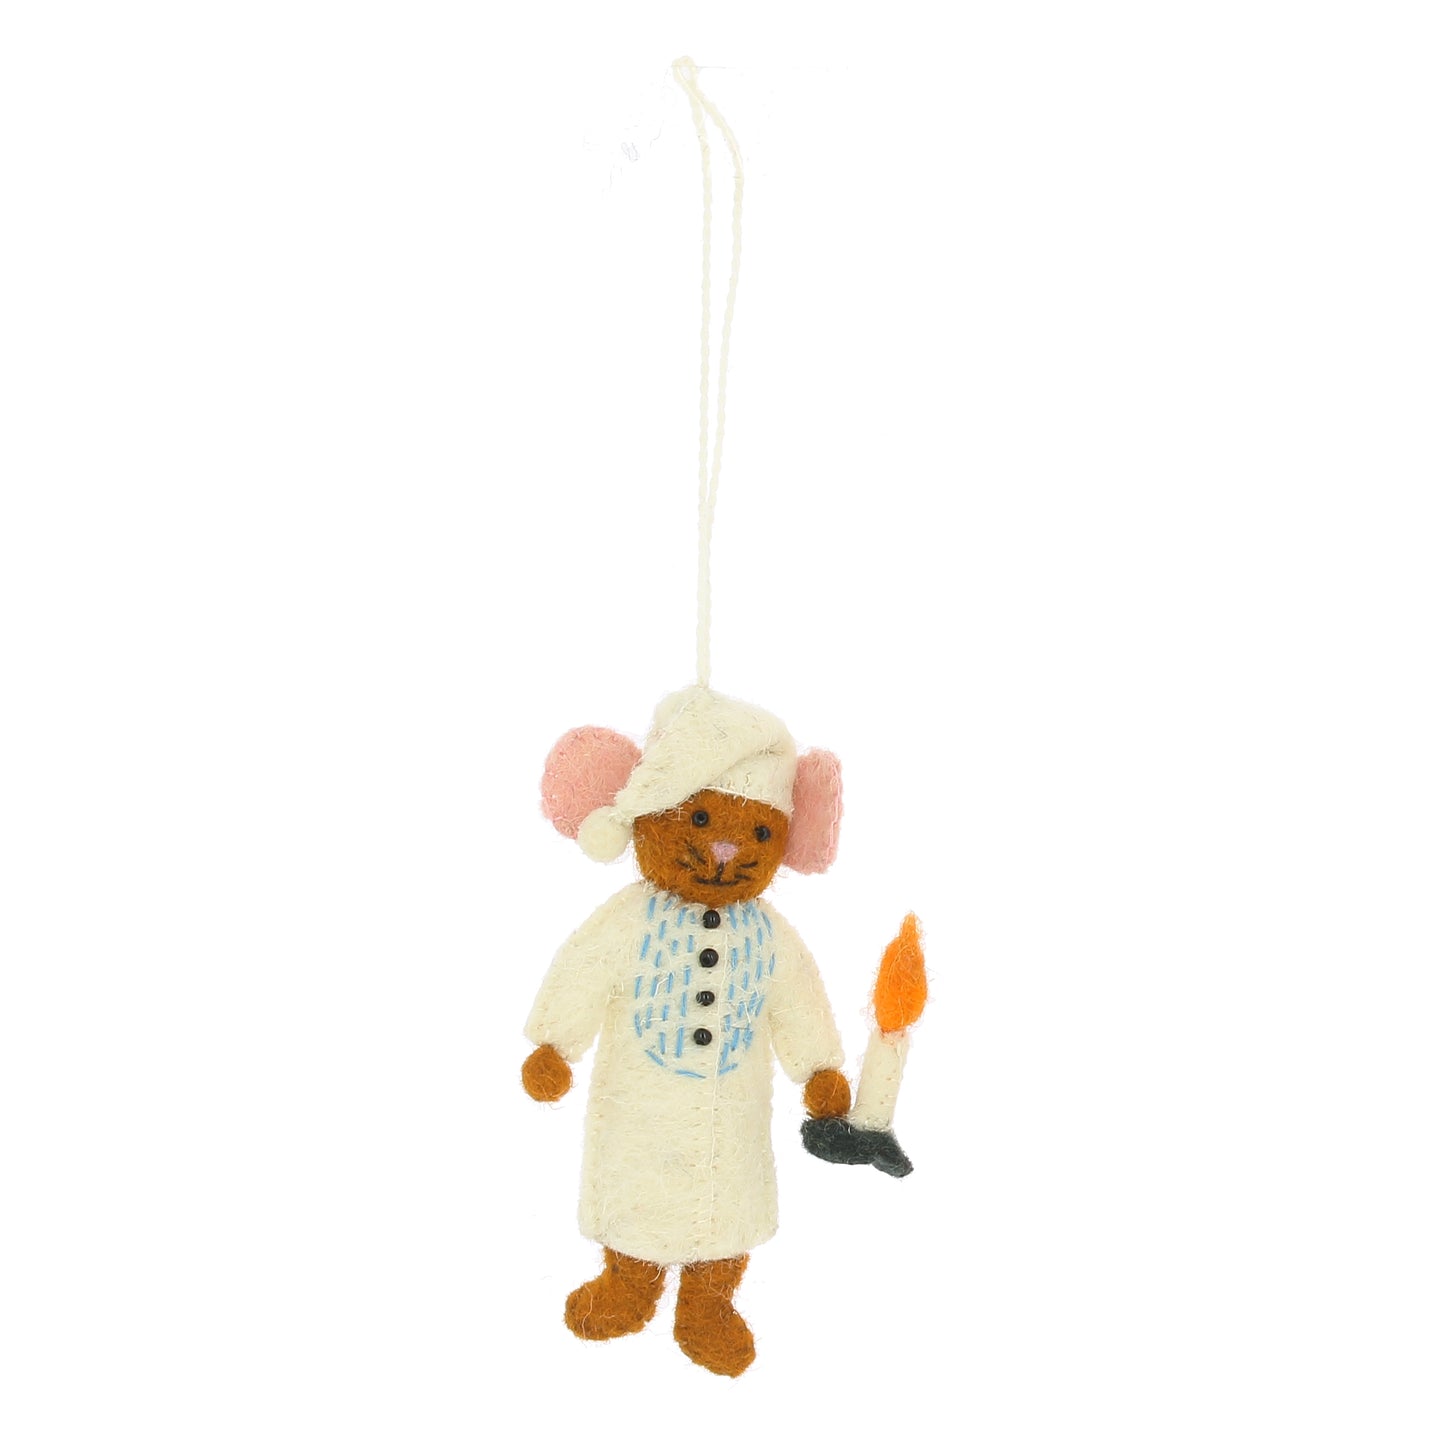 Nightshirt Mouse with Candle Stick Hanging Decoration